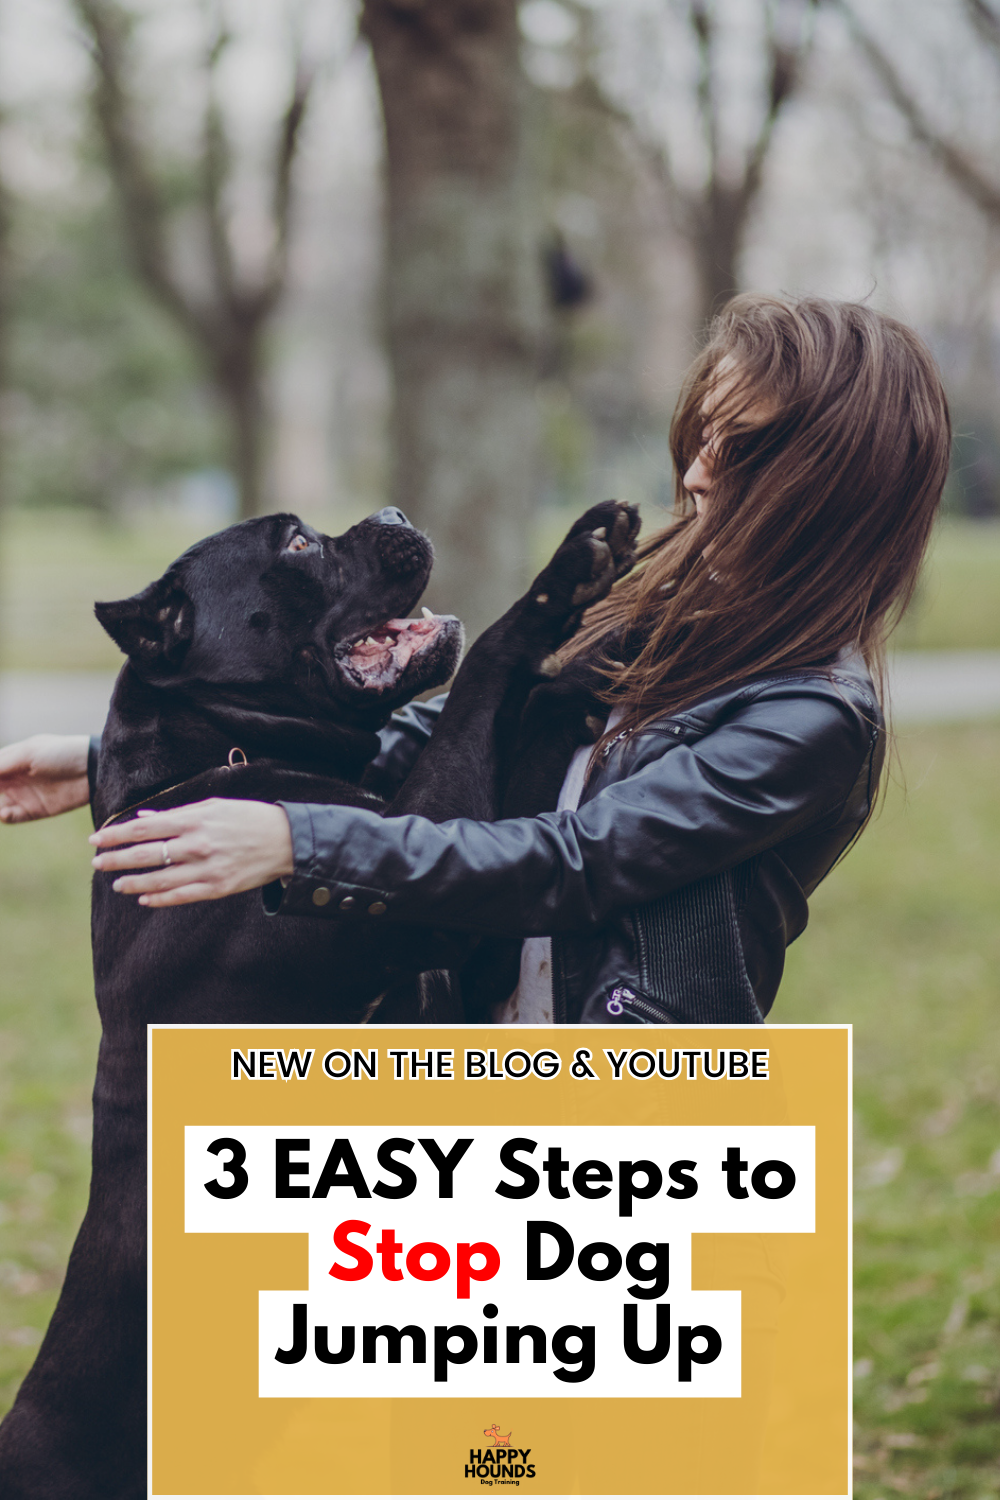 It can be really frustrating, embarrassing, AND dangerous if you have a dog that’s always jumping up. I want to share my easy, force free 3 step method for stopping dog jumping! Link takes you to blog & YouTube tutorials.